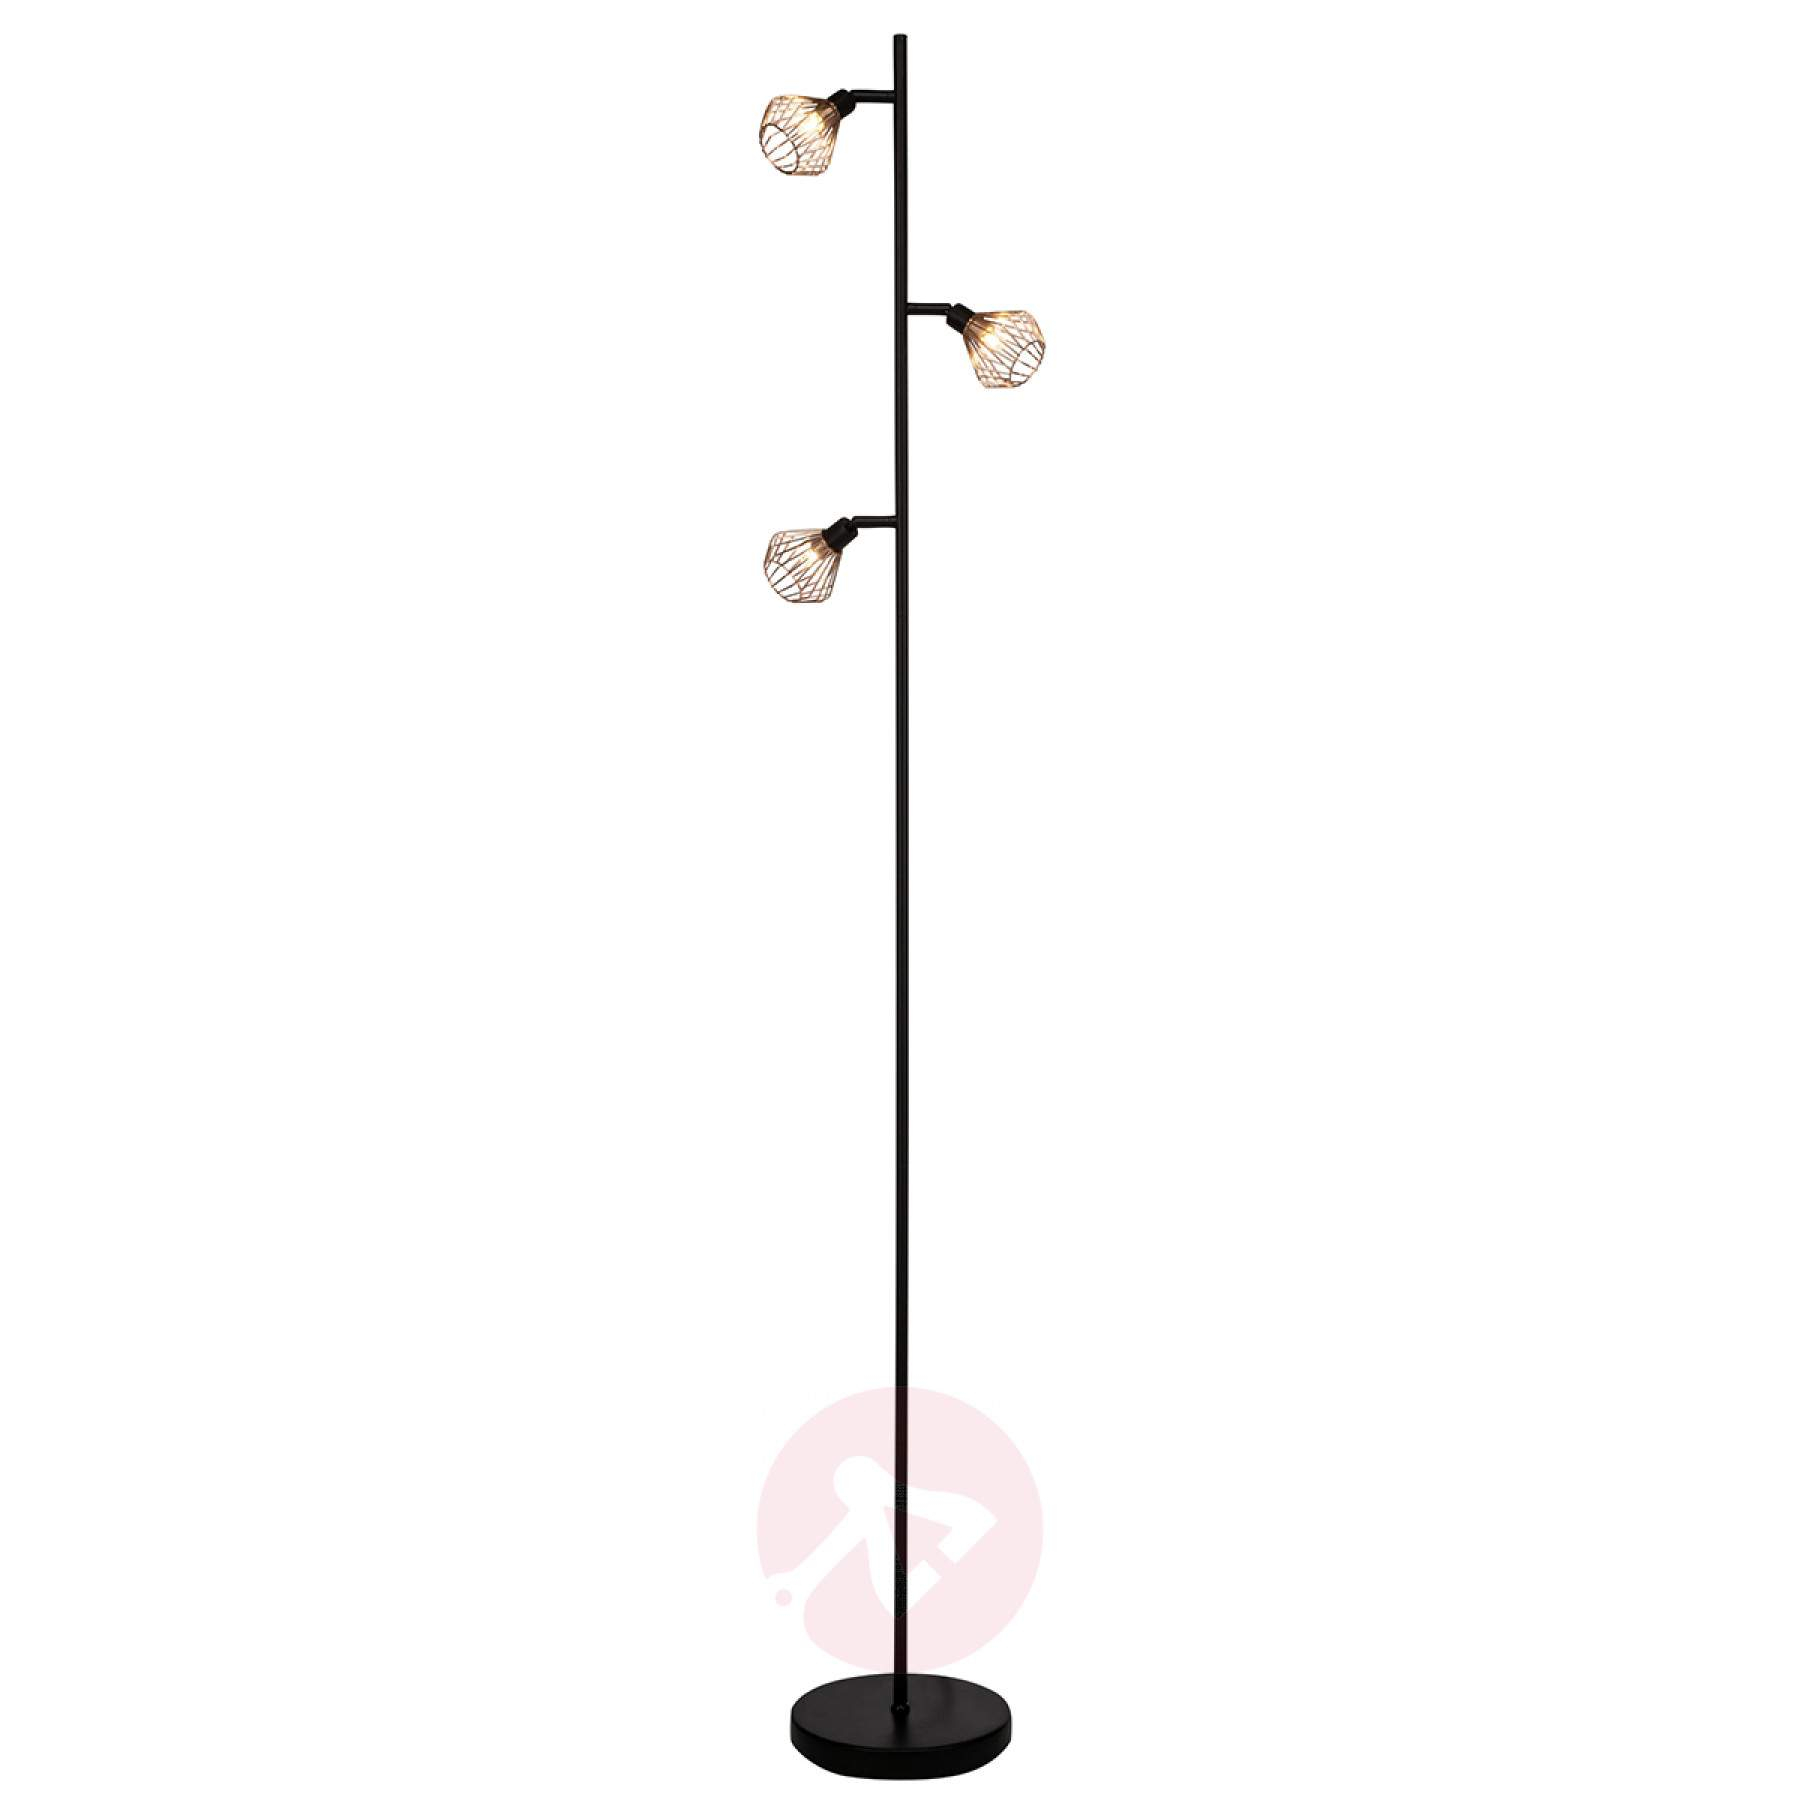 Dalma A Floor Lamp With 3 Wire Lampshades regarding measurements 1800 X 1800